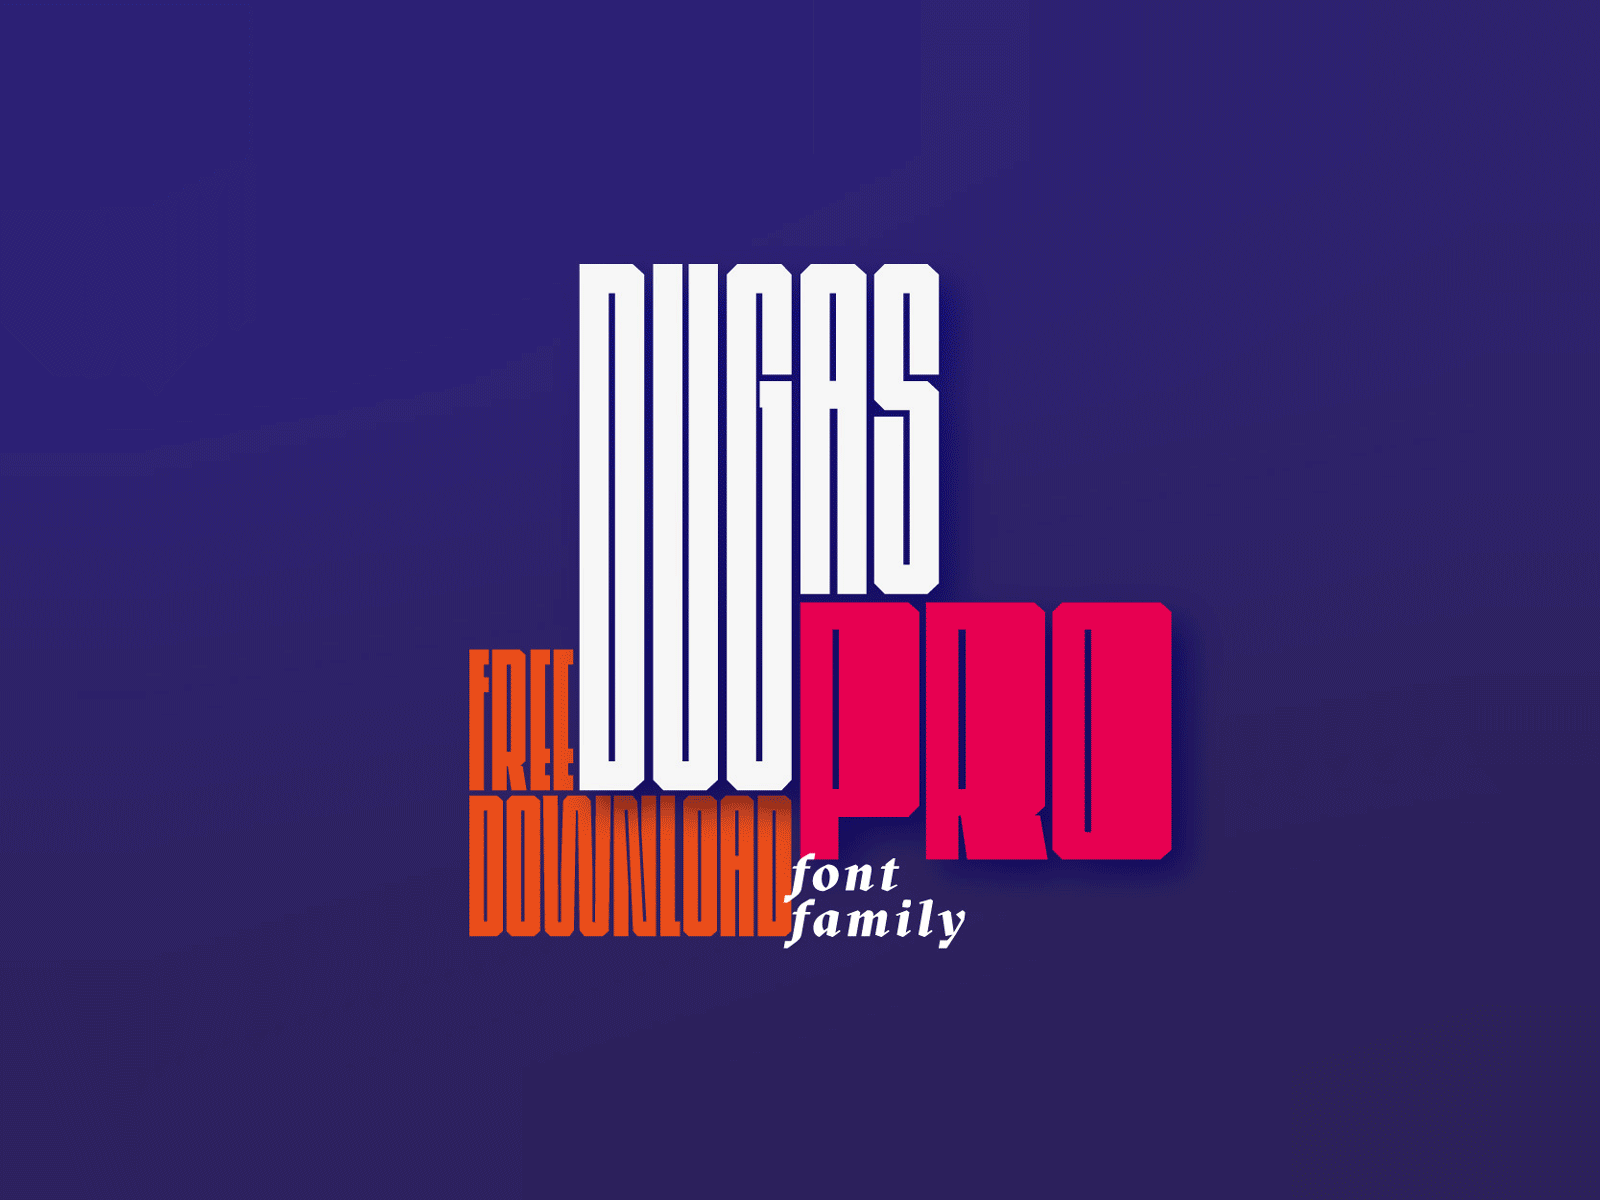 Dugas Pro — free font family display download download font font design font designer free download free font free font family ksenotyp long font poster font tall font typography typography poster